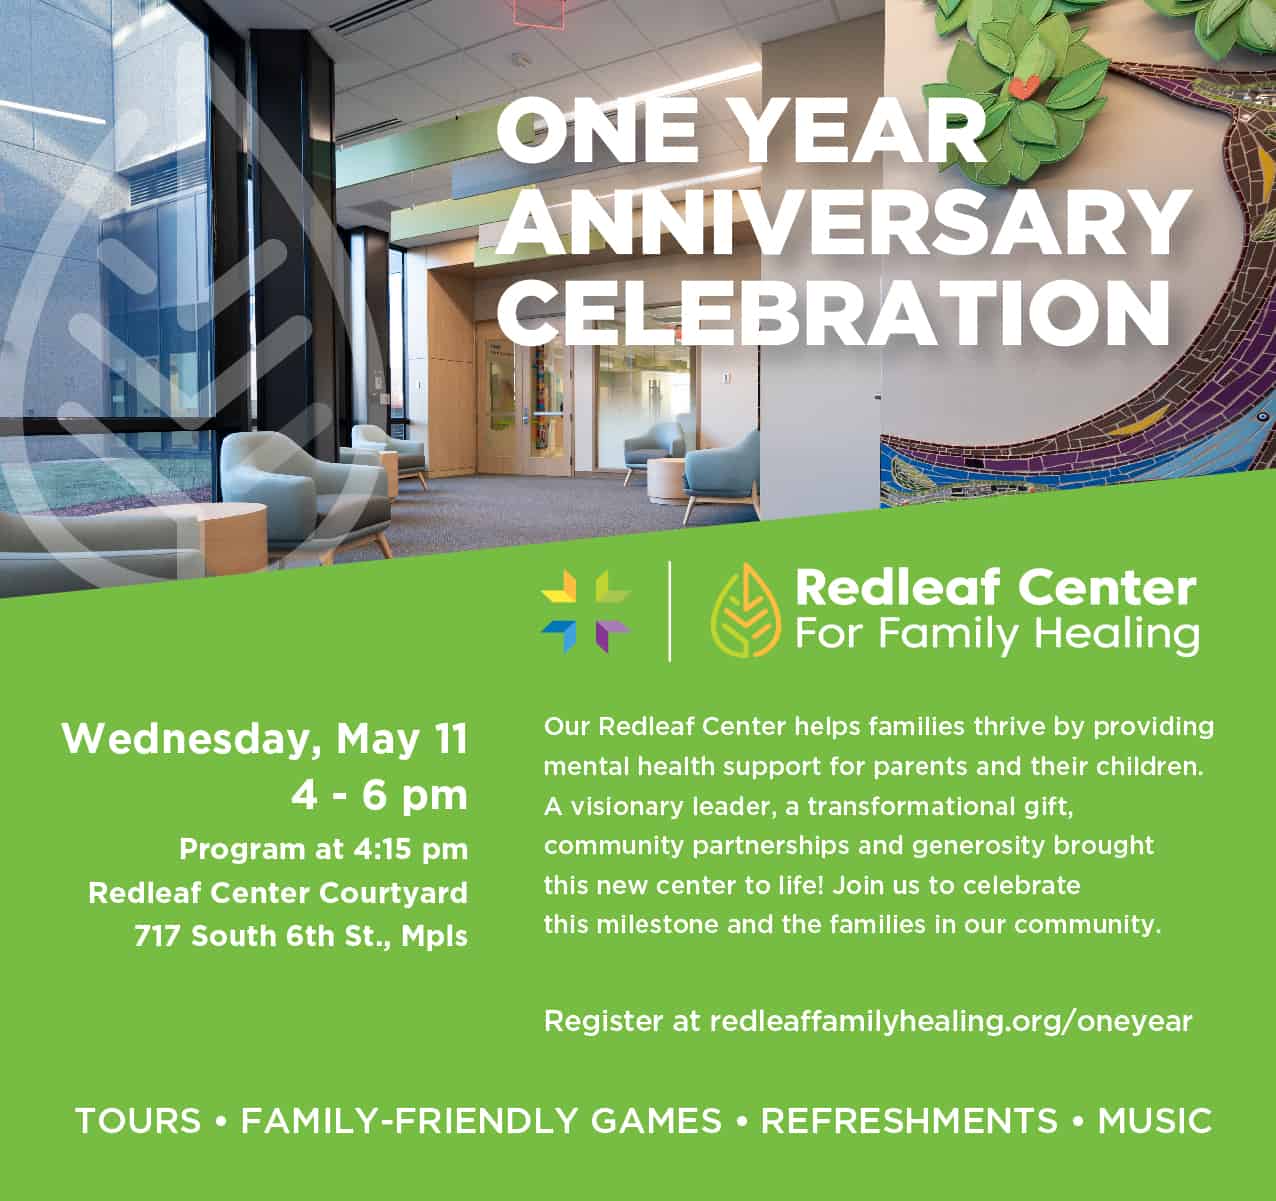 Redleaf Center for Family Healing Invitation for one year anniversary